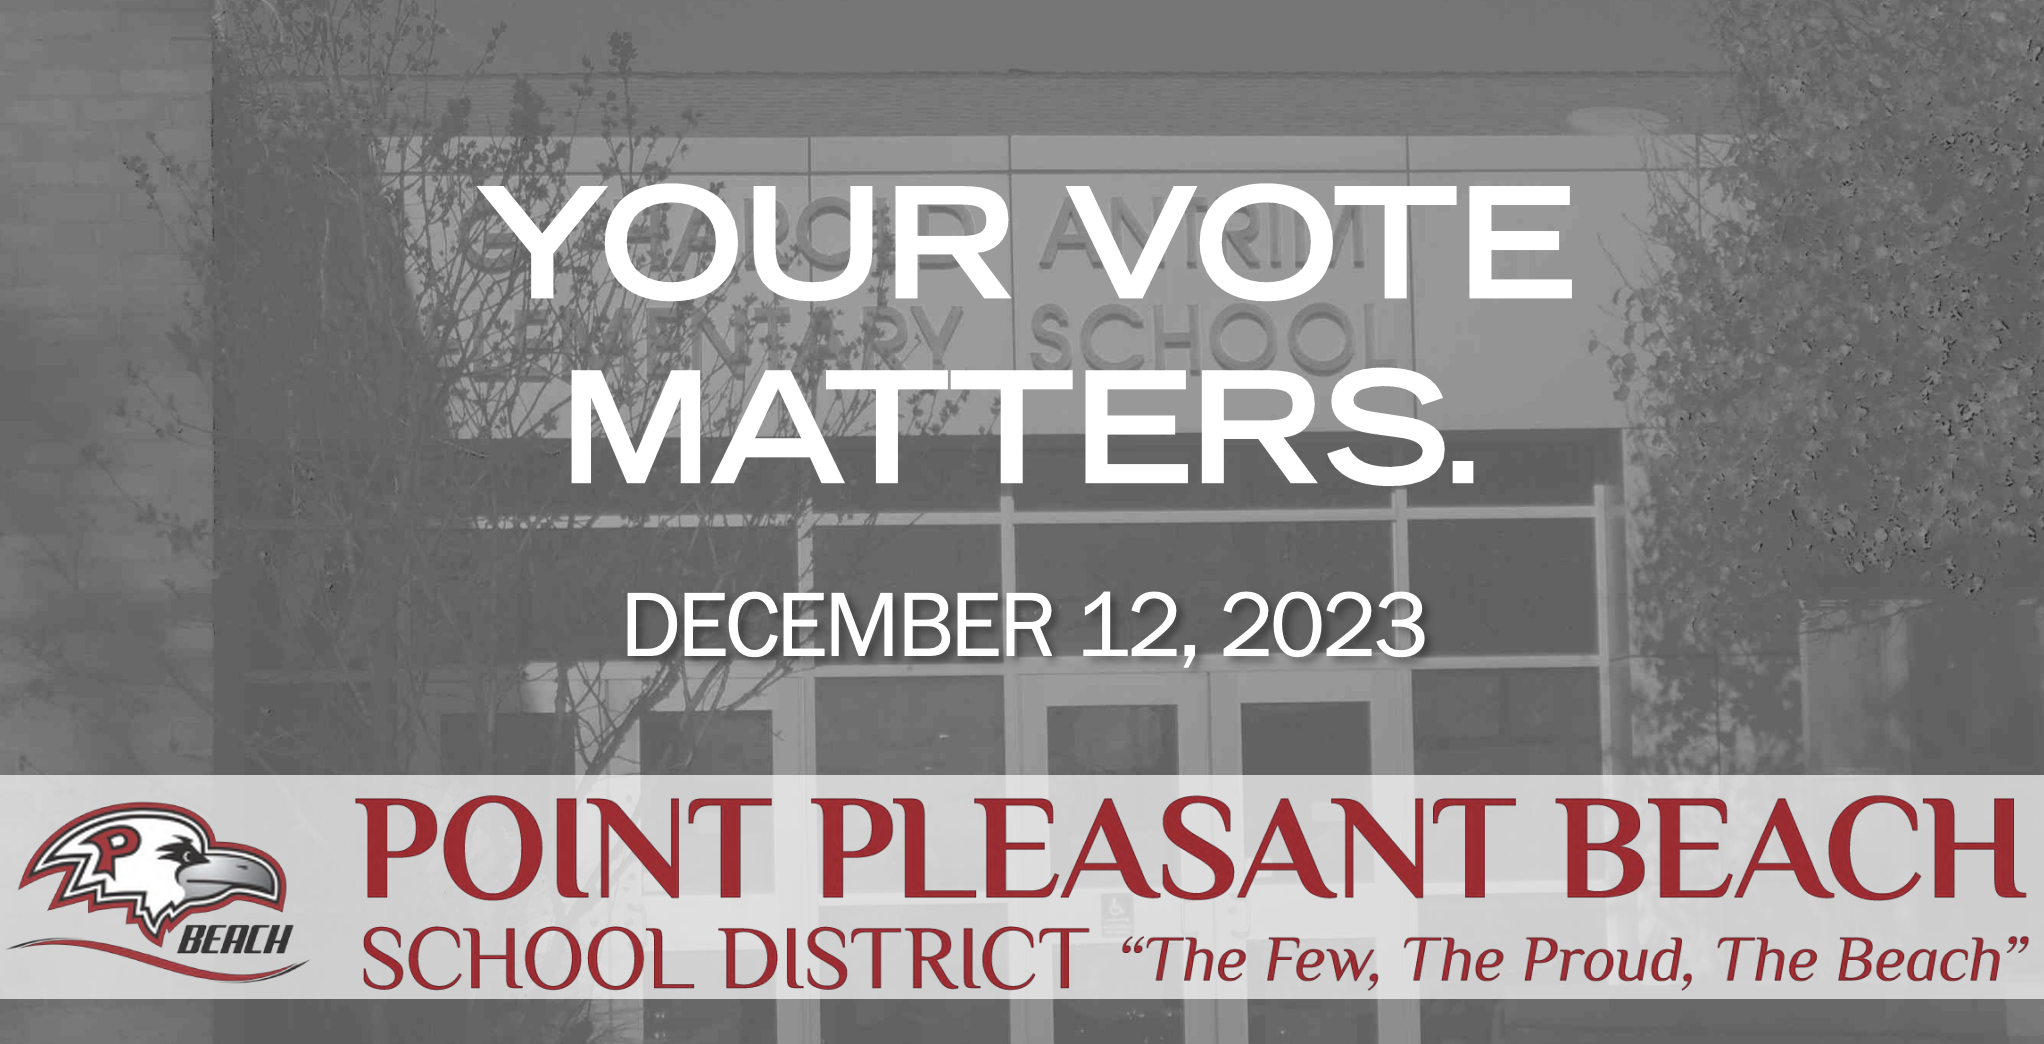 Your Vote Matters Dec 12 2023 Point Pleasant Beach the few, the proud, the beach